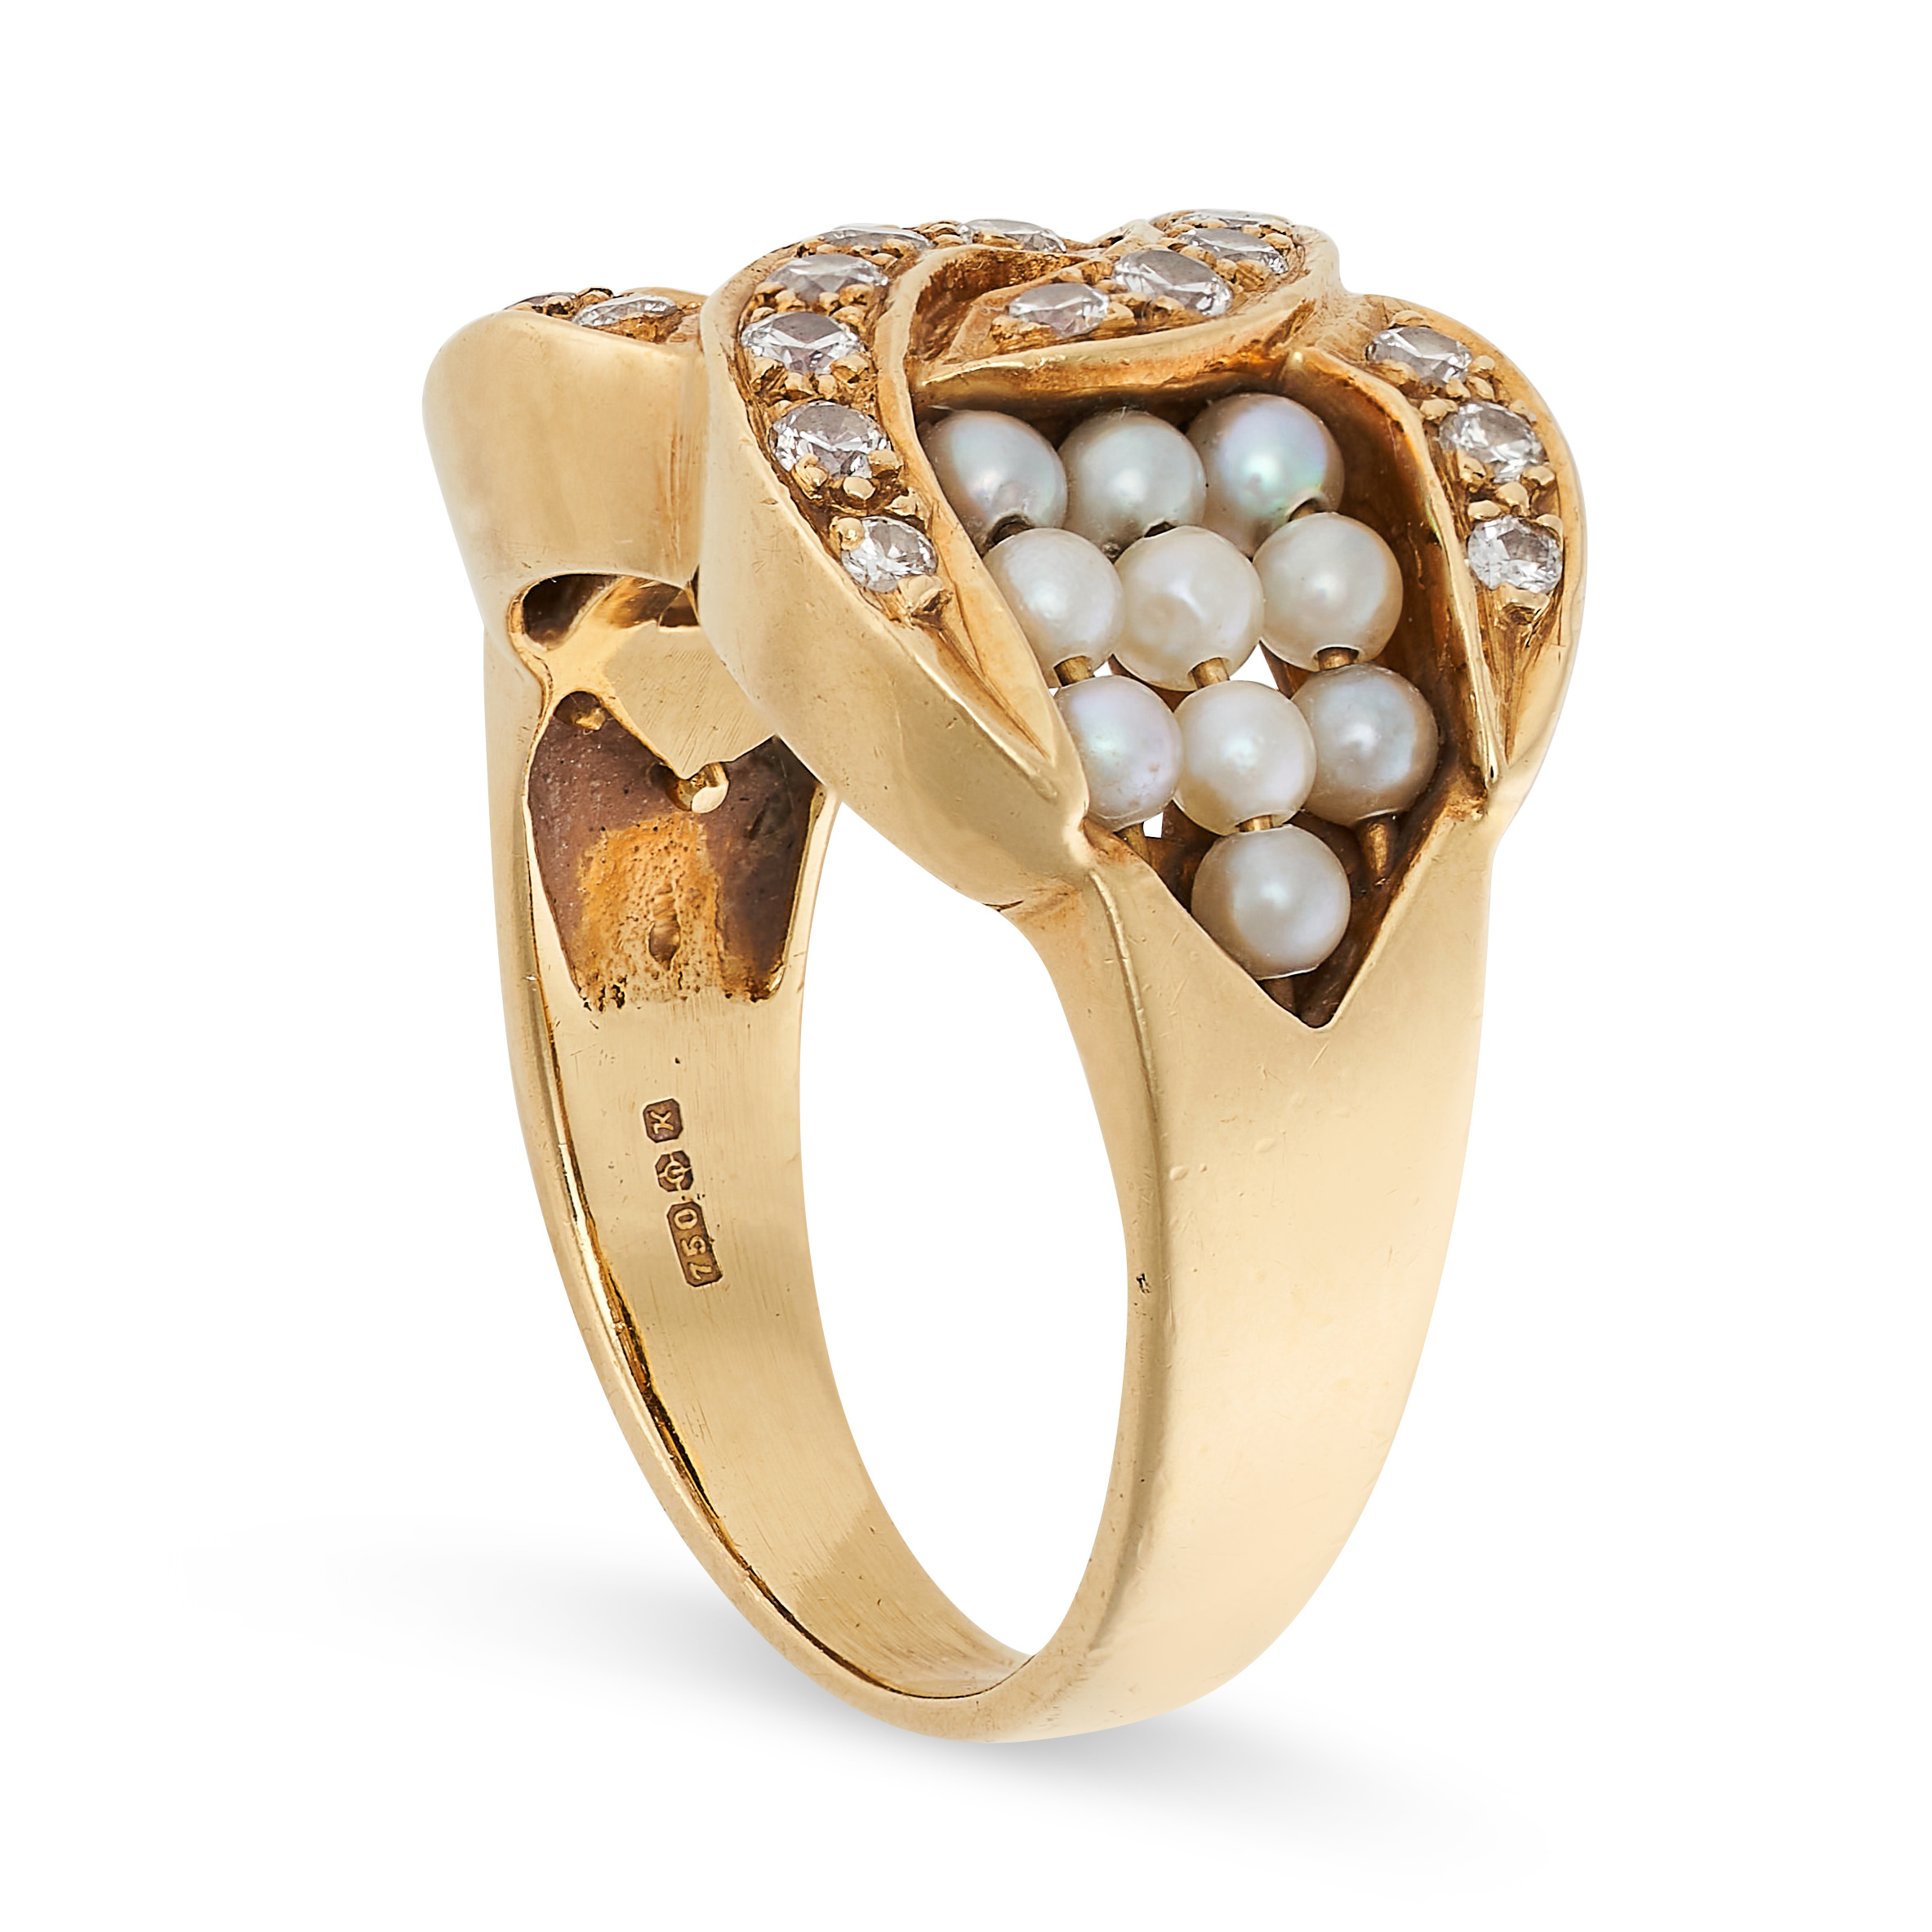 A VINTAGE FRENCH PEARL AND DIAMOND RING in 18ct yellow gold, comprising two interlocking C motifs - Image 2 of 2